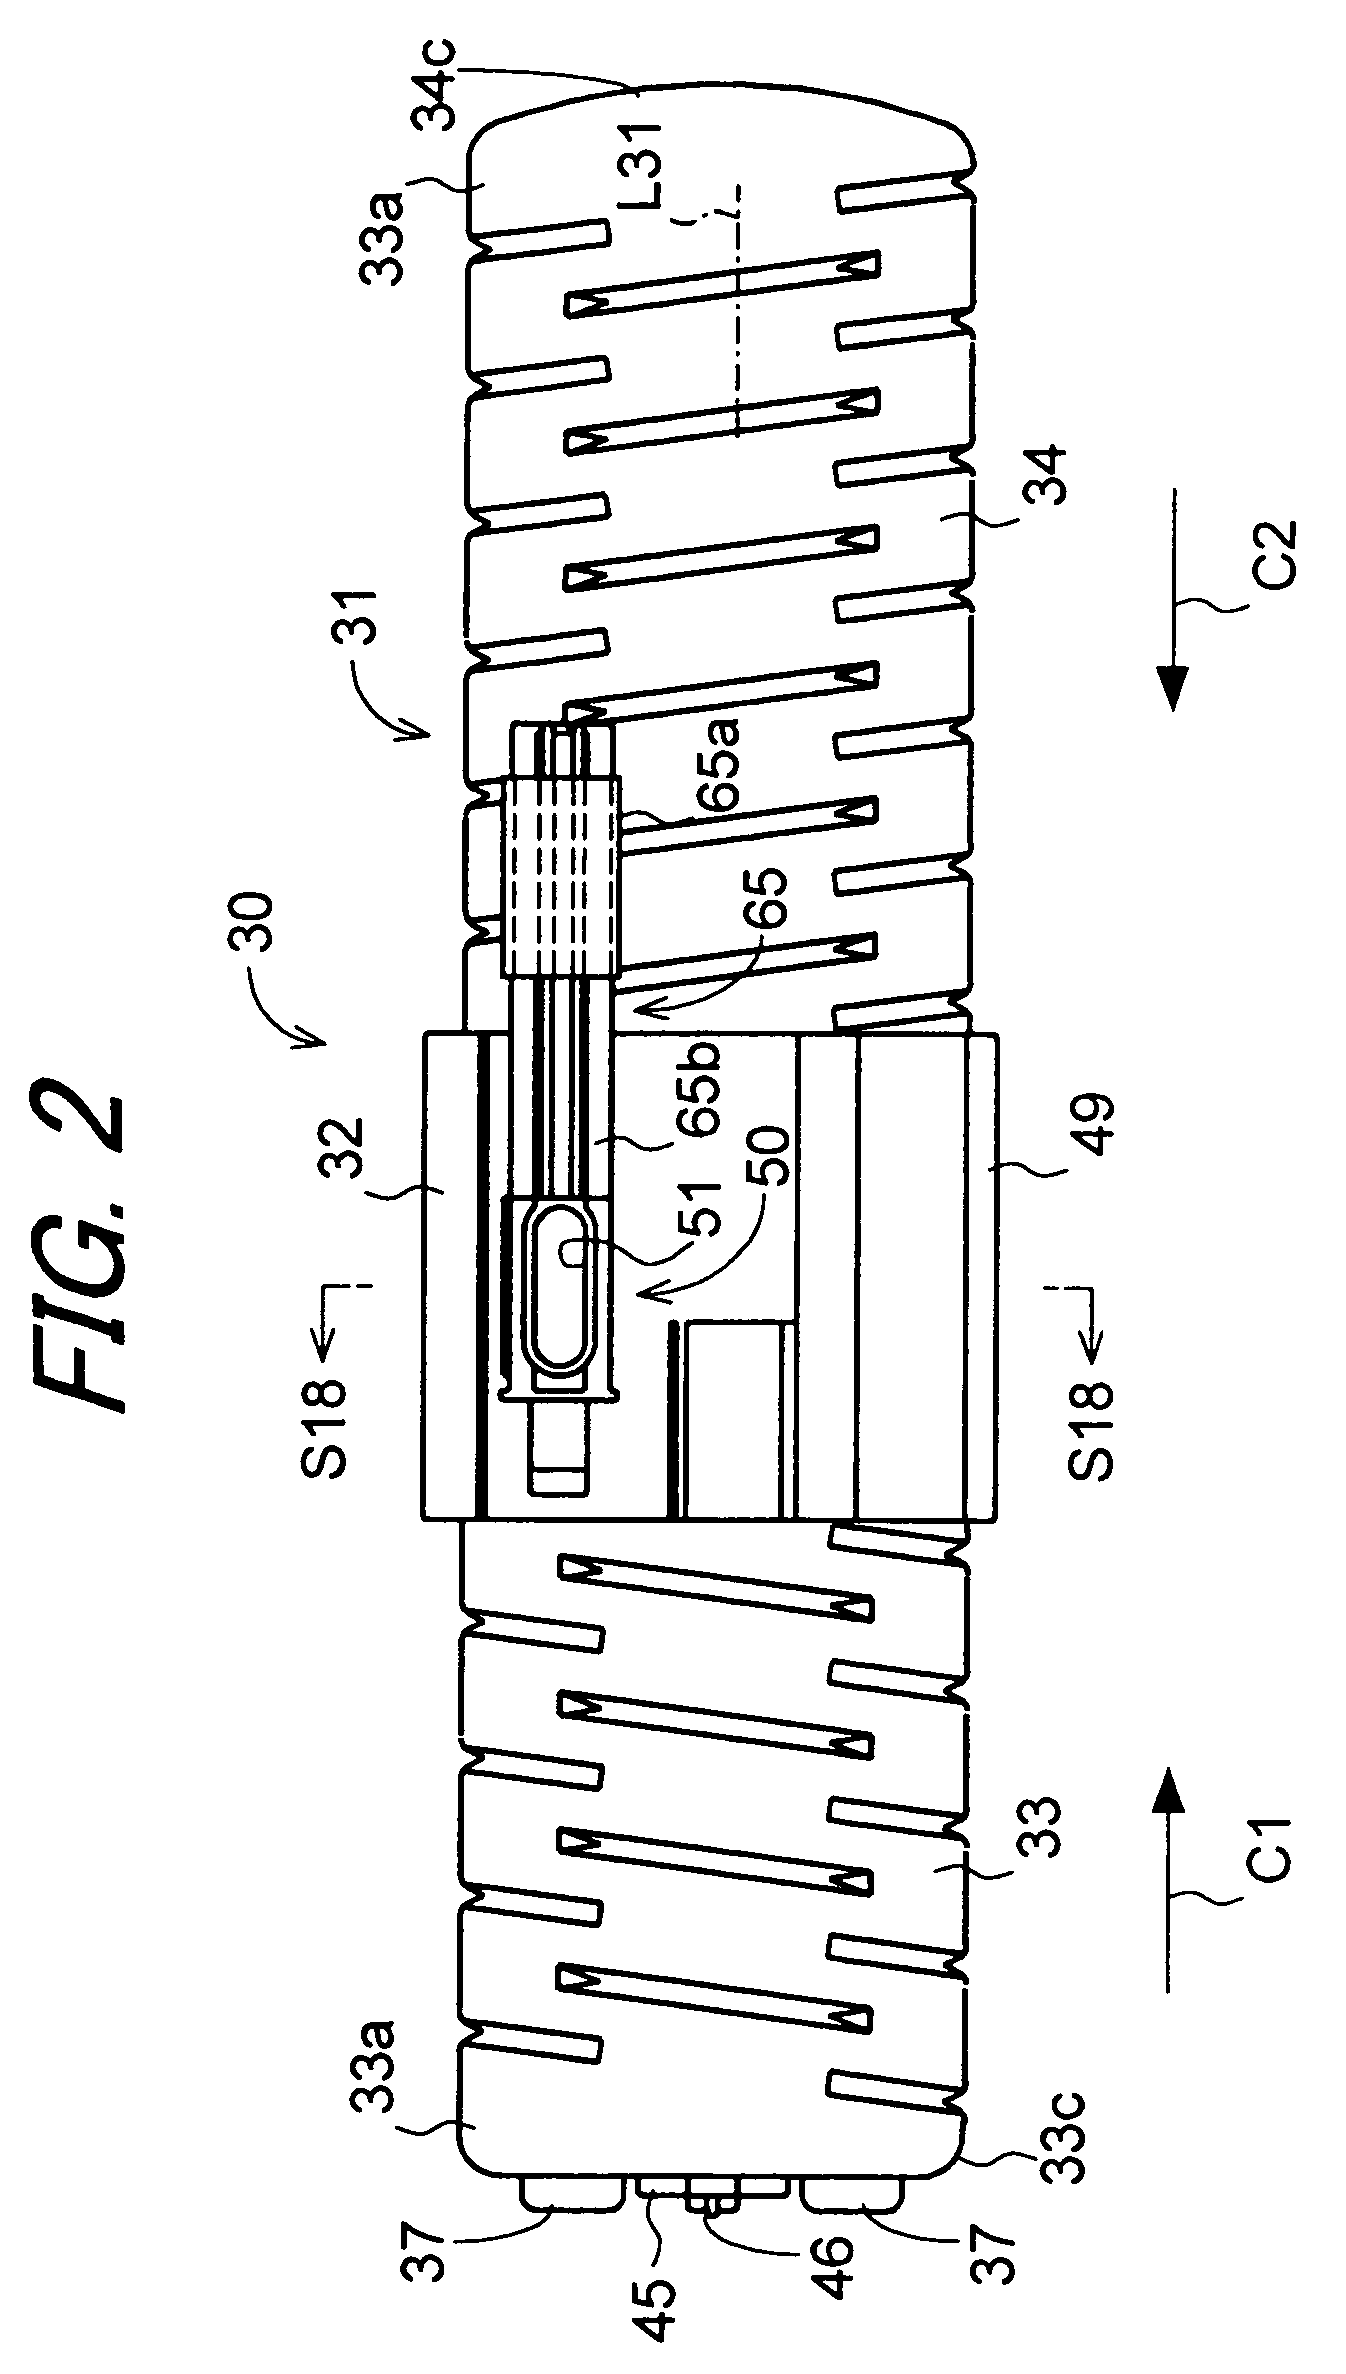 Developer container and image forming apparatus